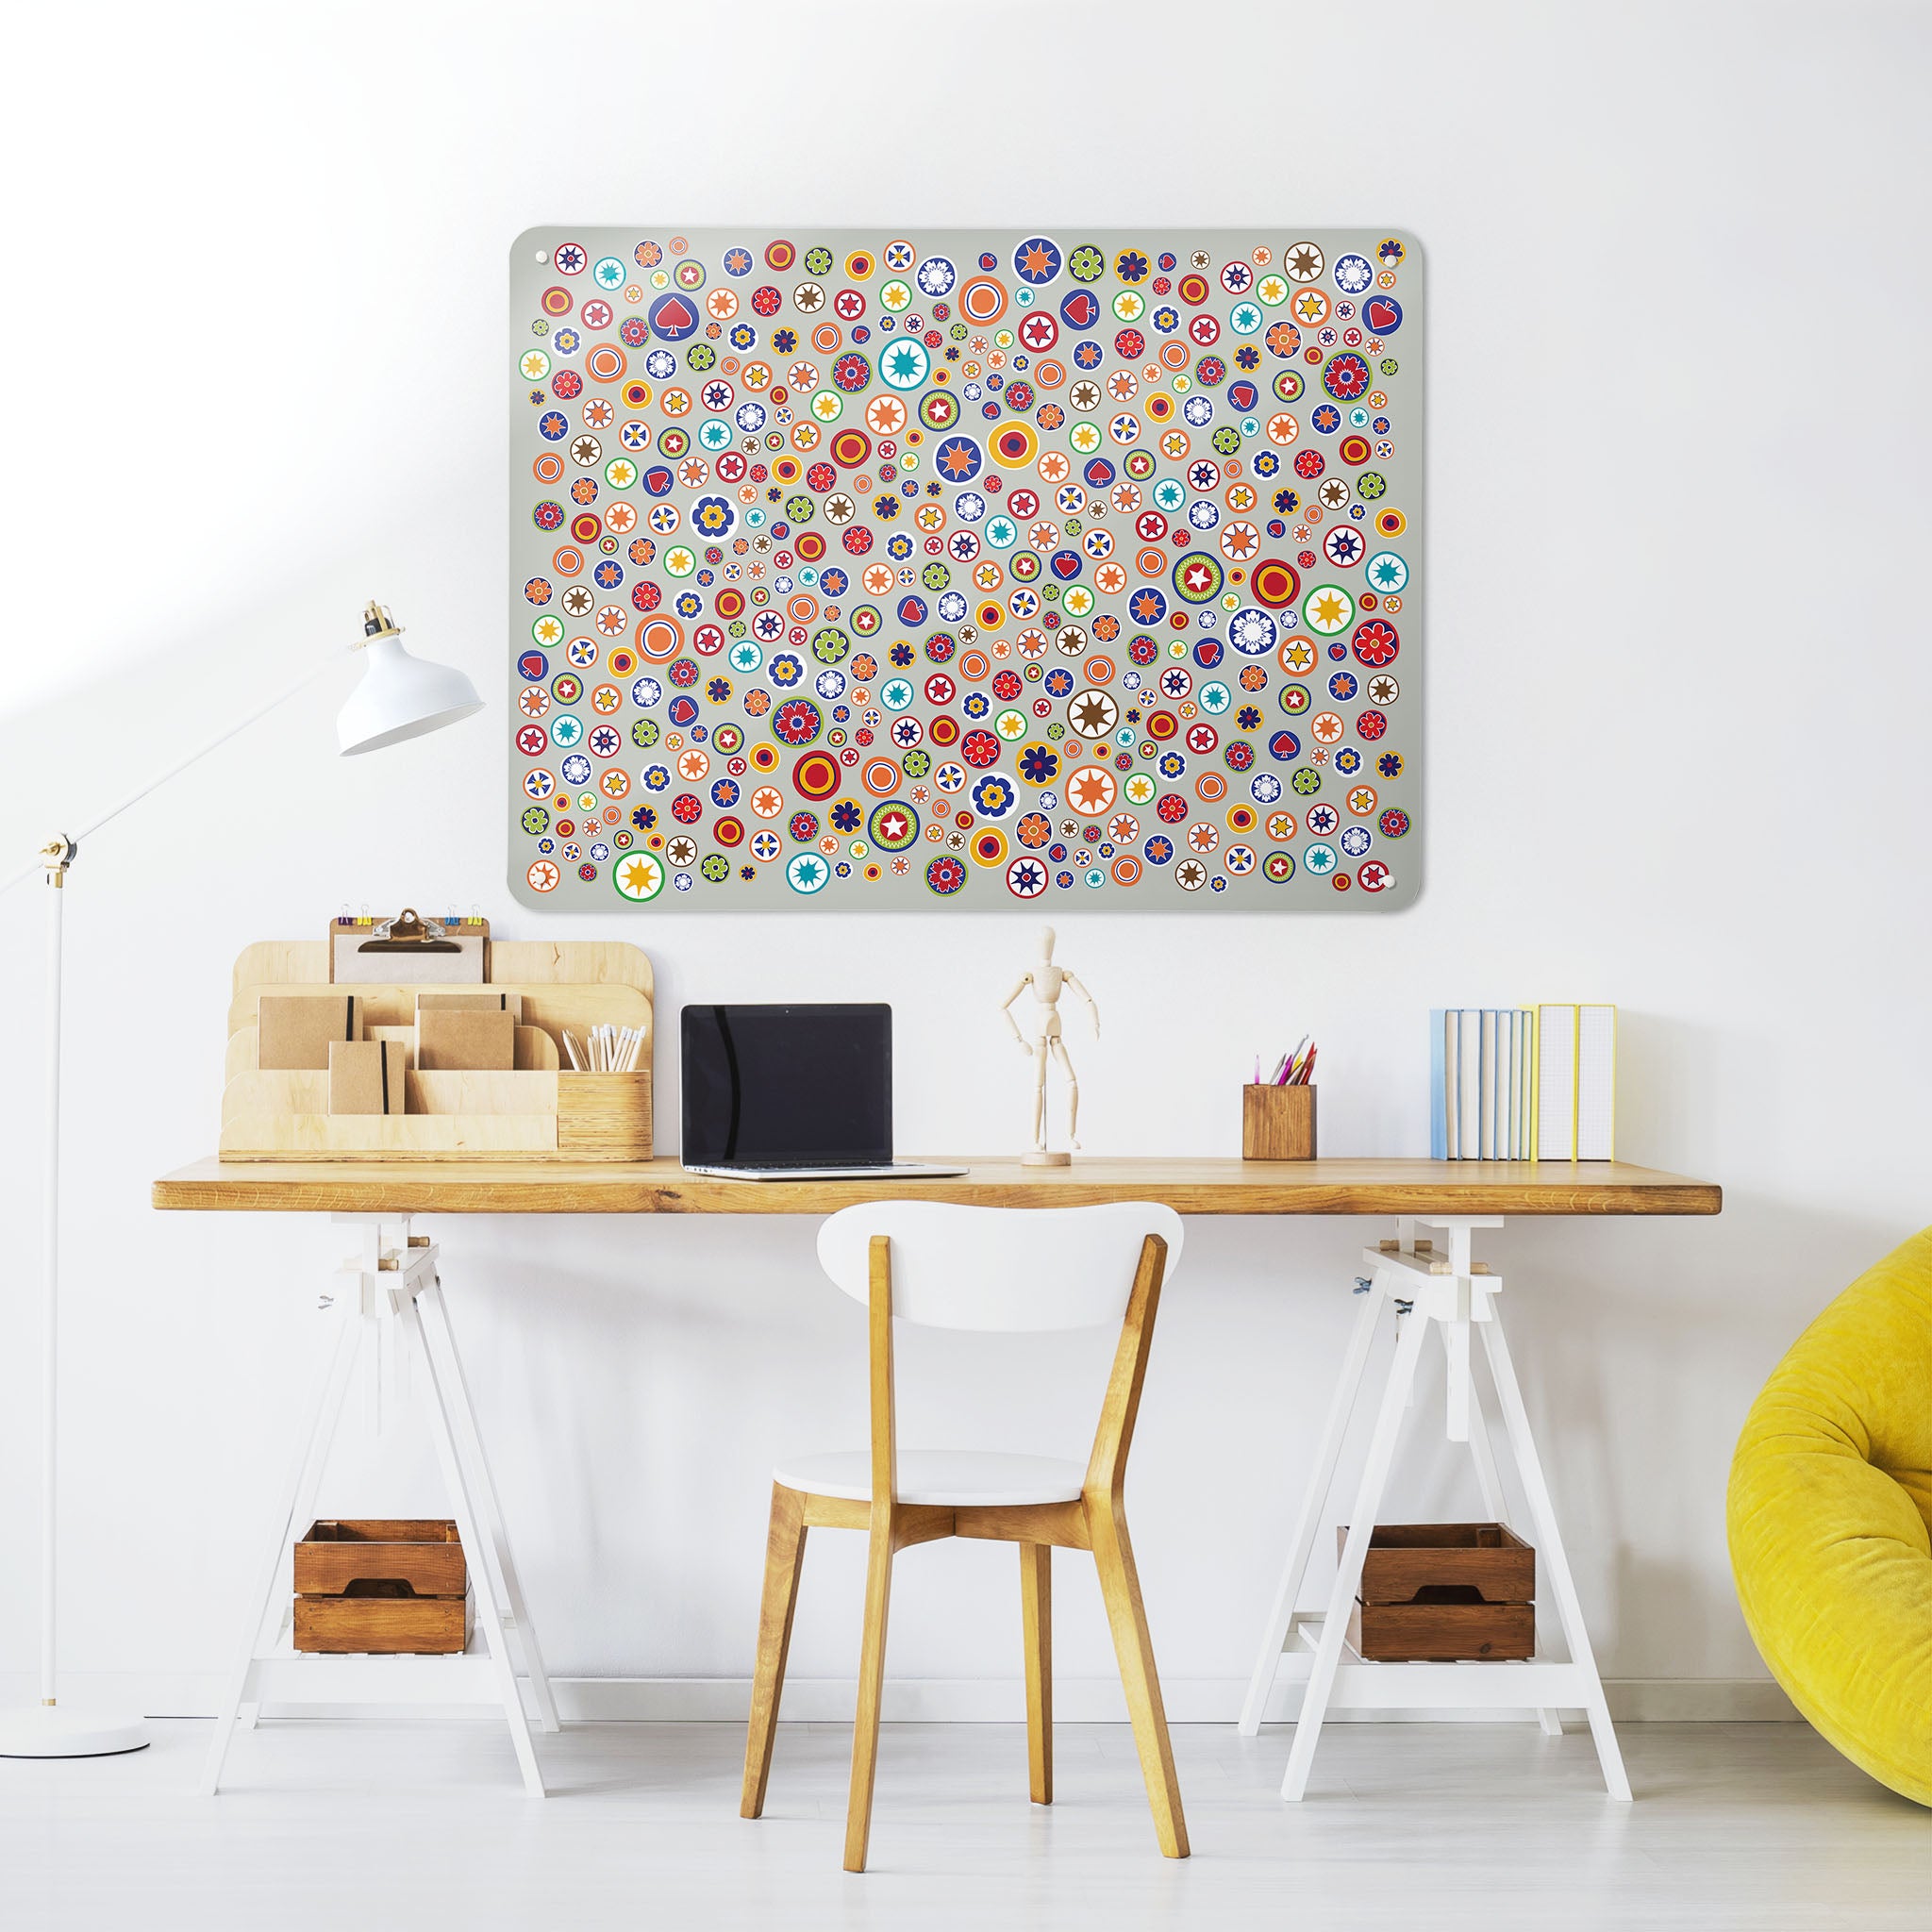 A desk in a workspace setting in a white interior with a magnetic metal wall art panel showing millefiori pattern on a grey background